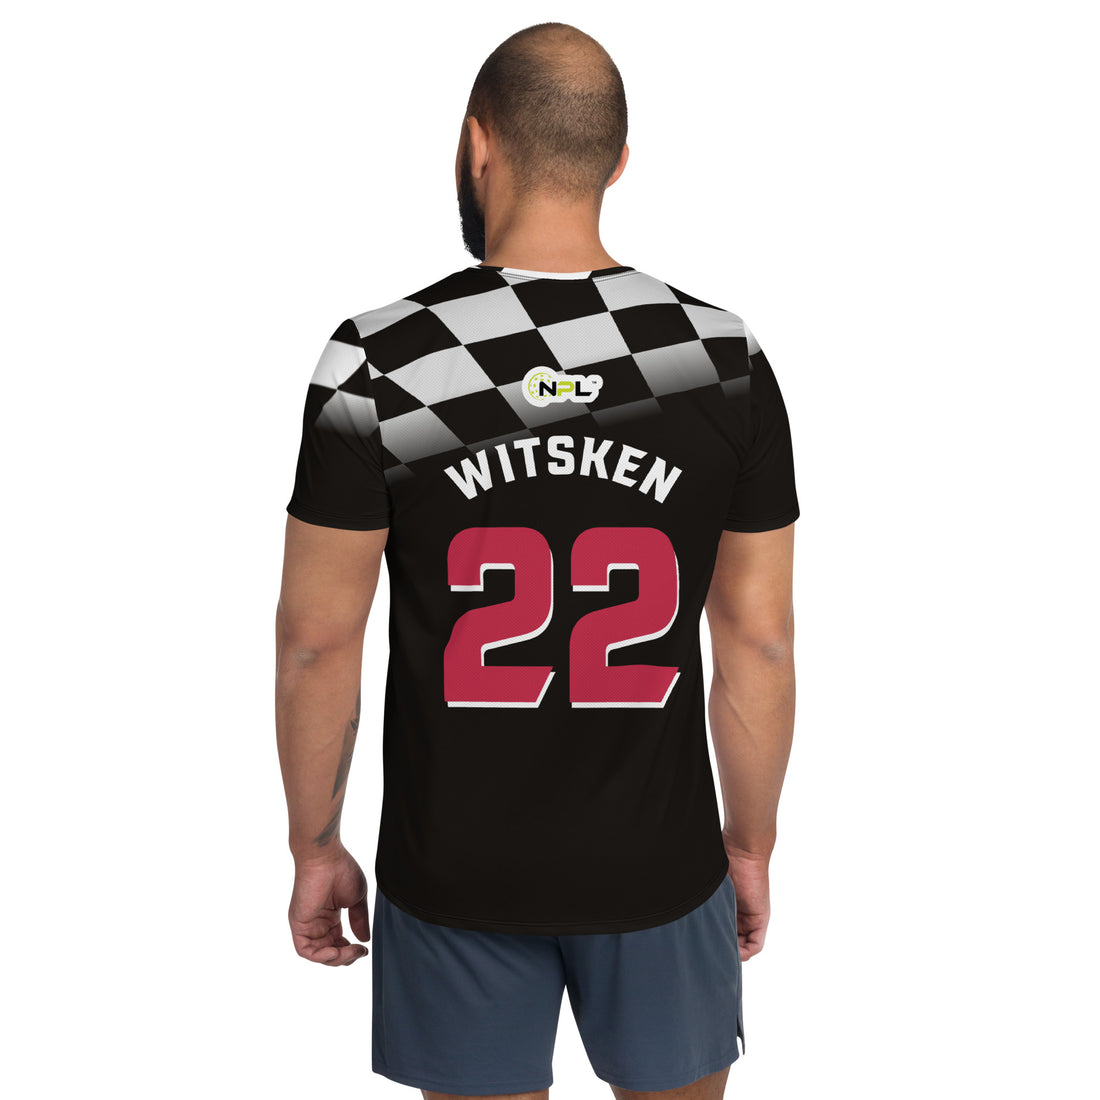 Rick Witsken 22 Indy Drivers™  SKYblue™ 2023 Authentic Jersey - Black